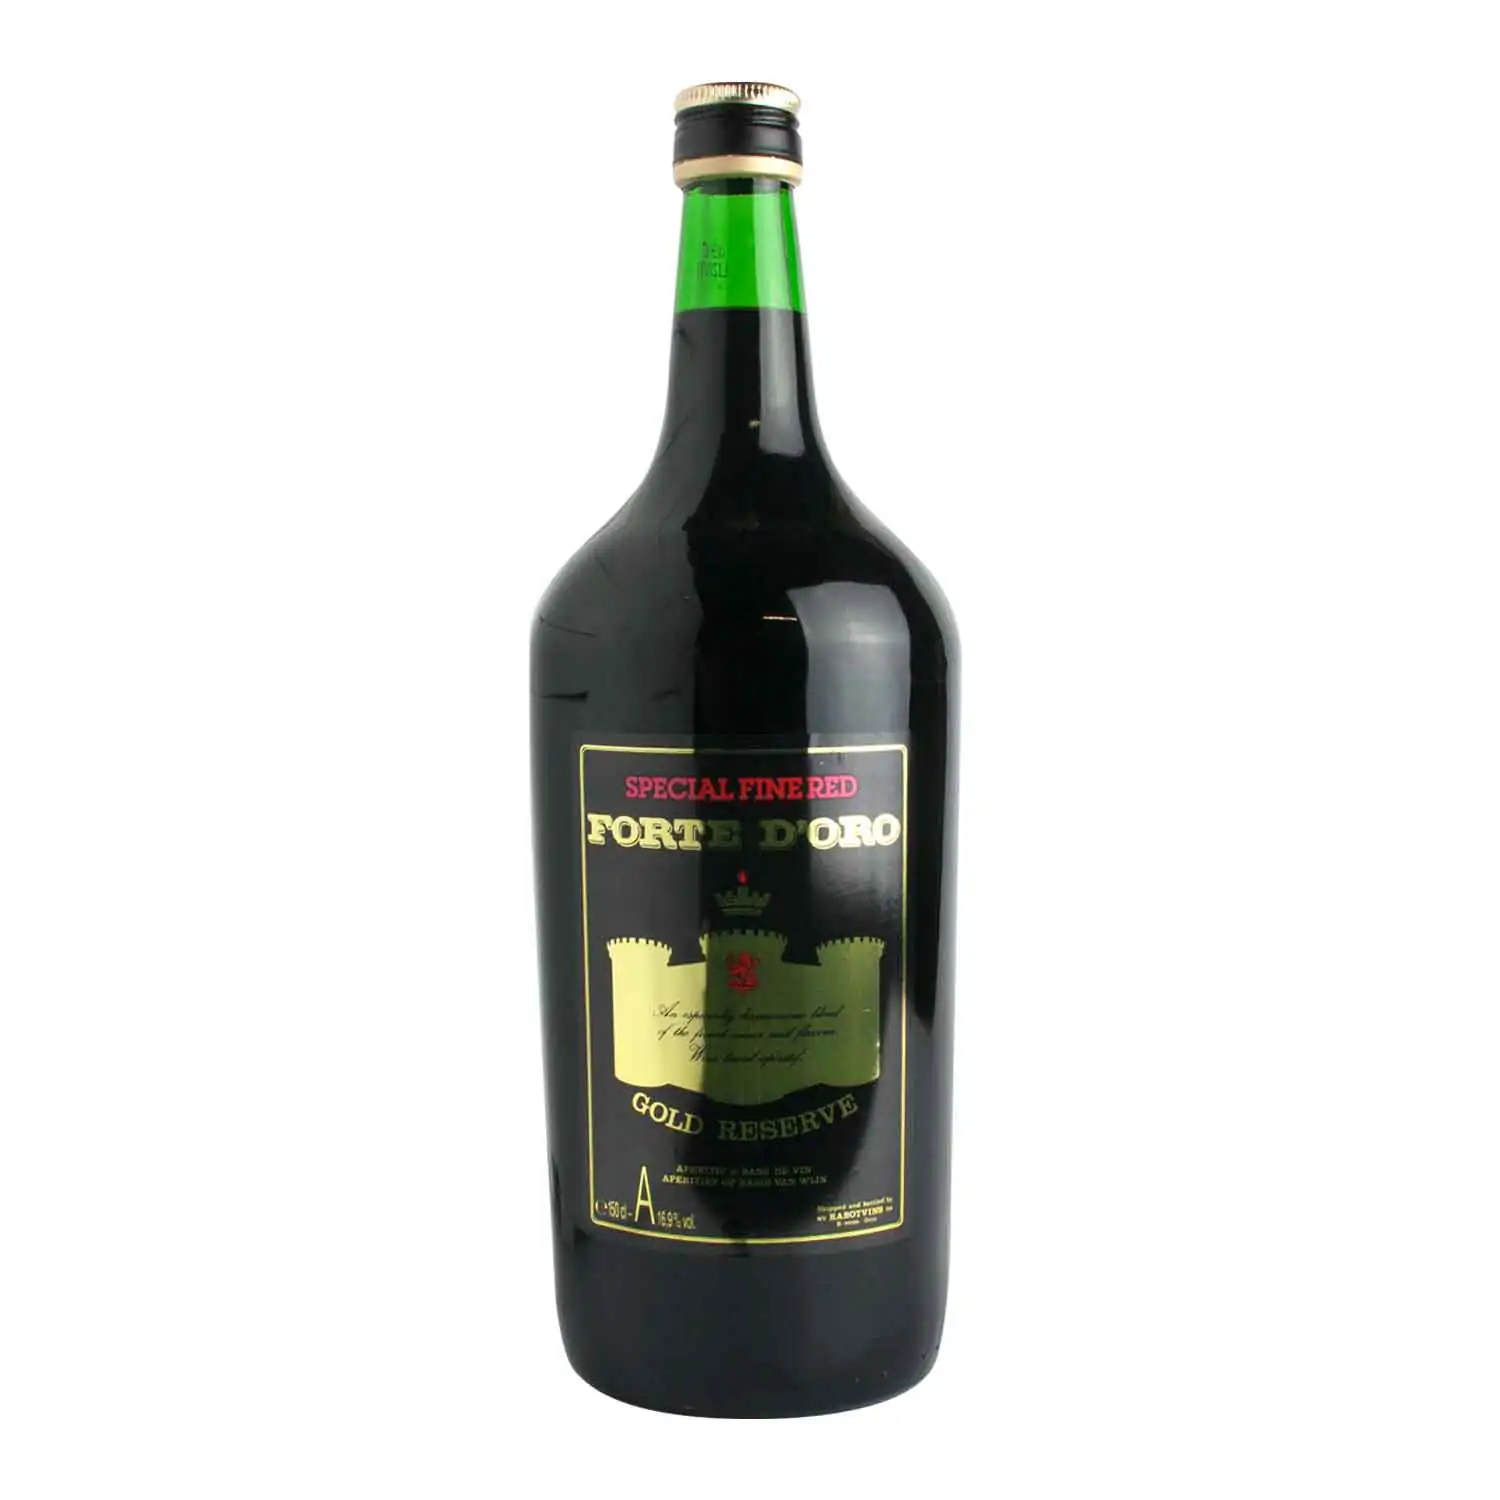 Forte d'Oro red 1,5l Alc 16,9% - Buy at Real Tobacco